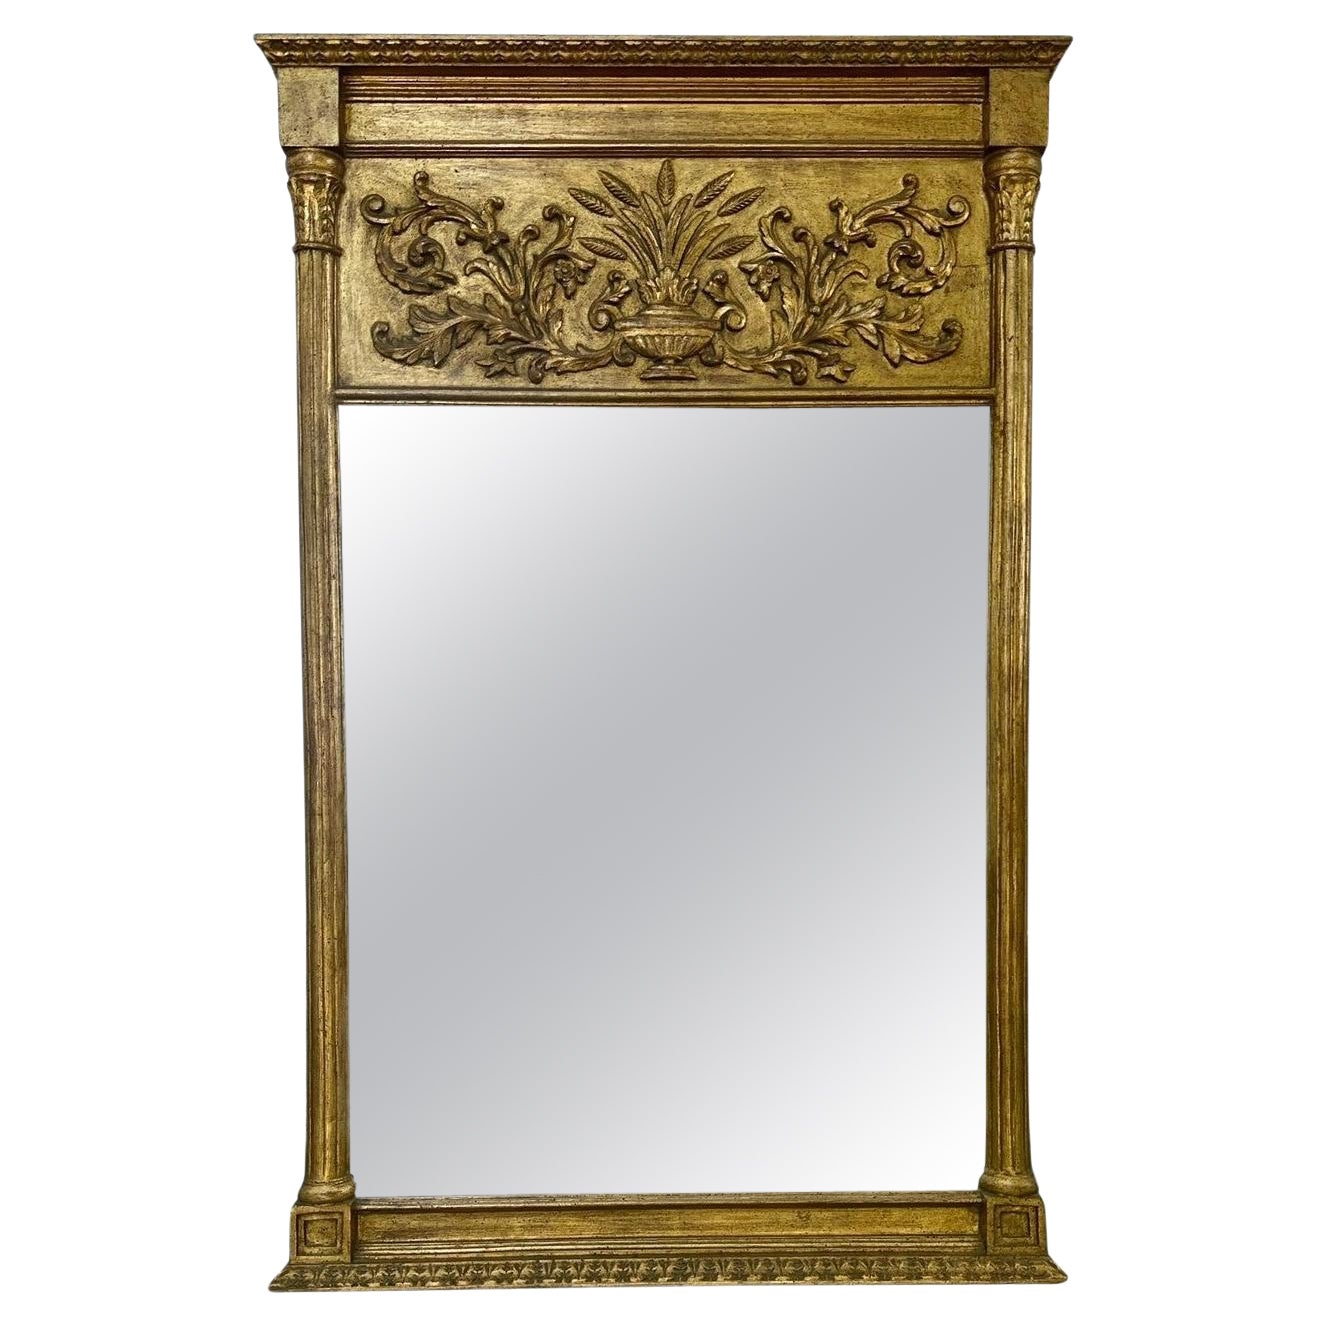 Large Neoclassical Style 20th Century Antique Italian Giltwood Mirror.